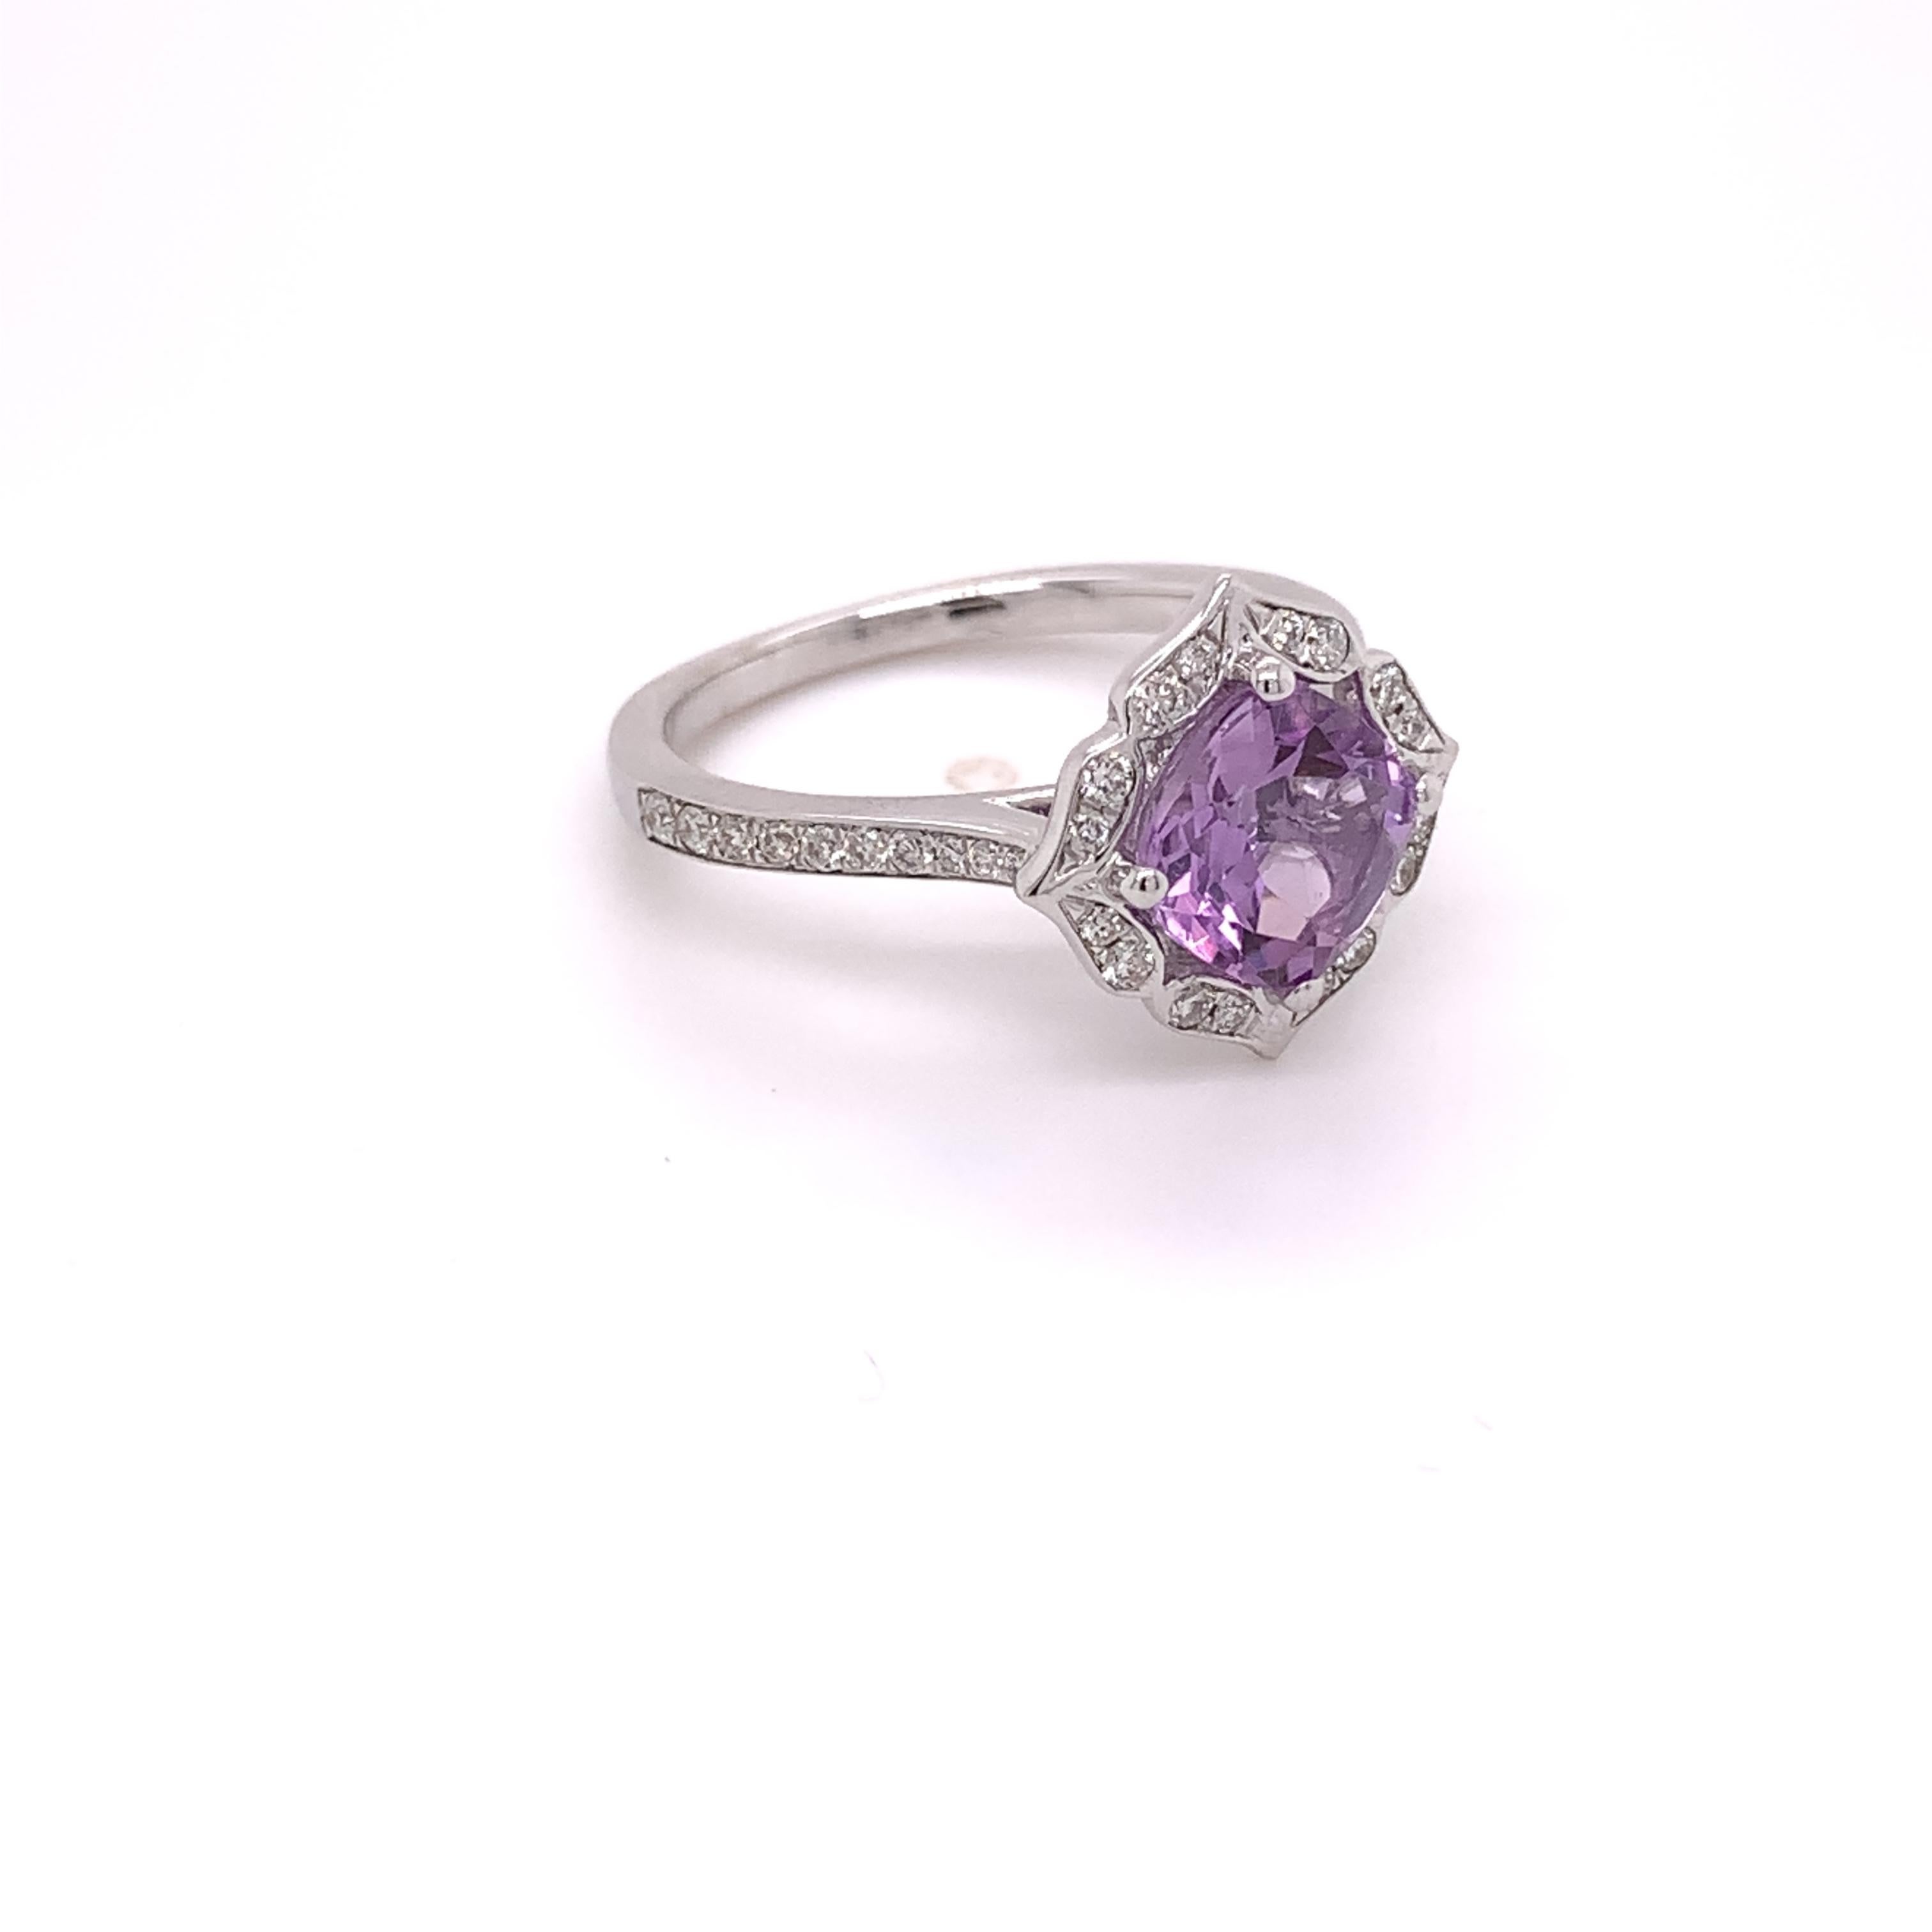 This ring was crafted in 14 karat white gold. It has a natural 1.37 carat cushion cut amethyst measuring 7.00 x 7.00 x 4.50mm. This ring also contains 36 natural round brilliant diamonds weighing approximately 0.27 carats (H-I color, and I1